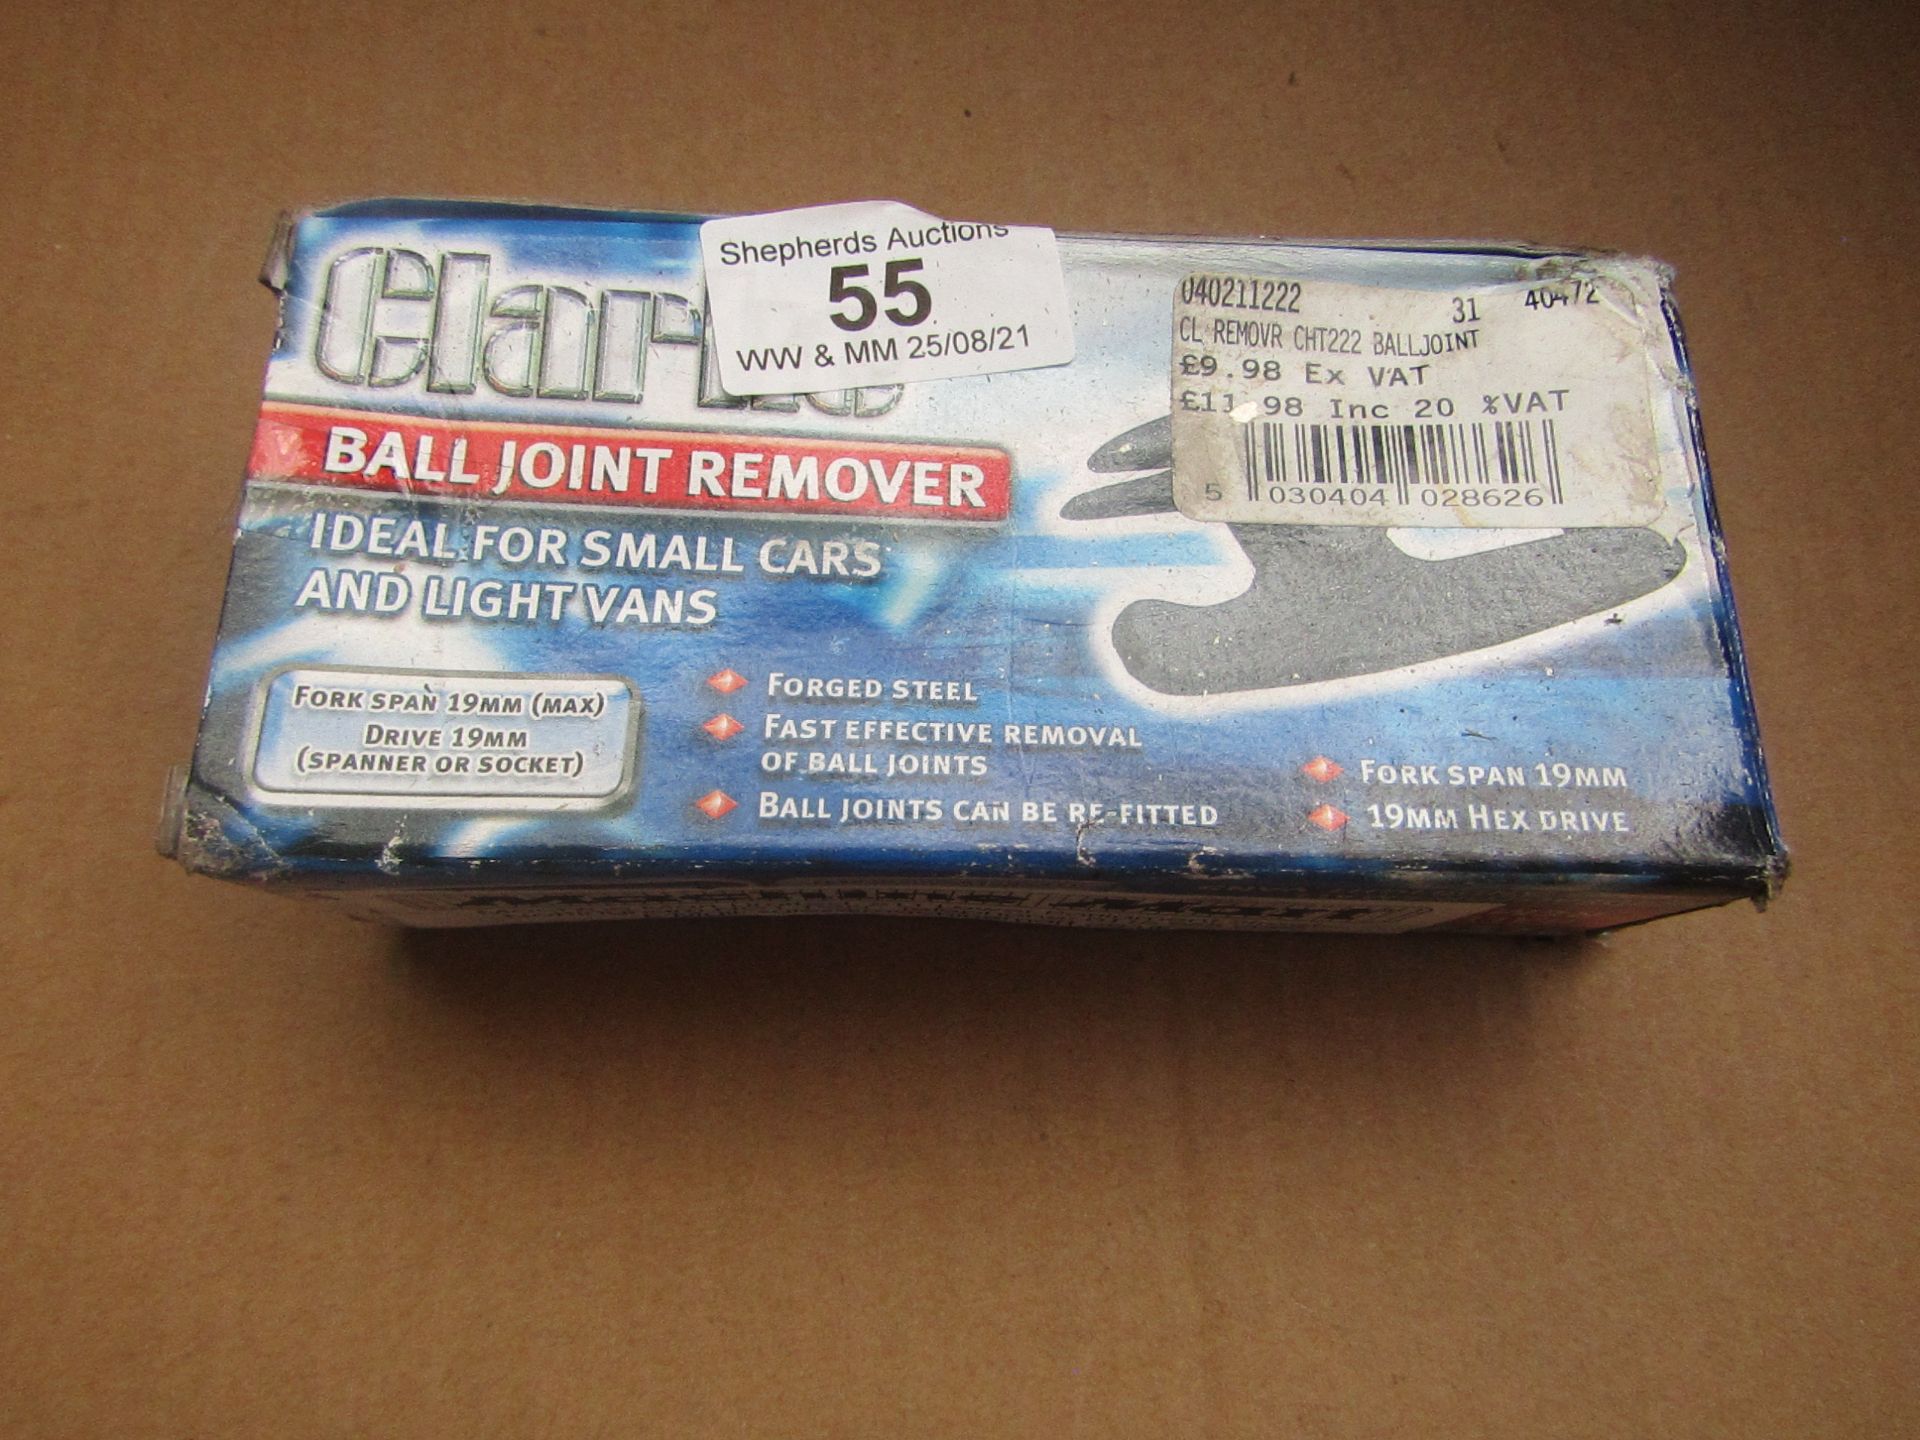 1x CL REMOVR CHT222 BALLJOINT, This lot is a Machine Mart product which is raw and completely